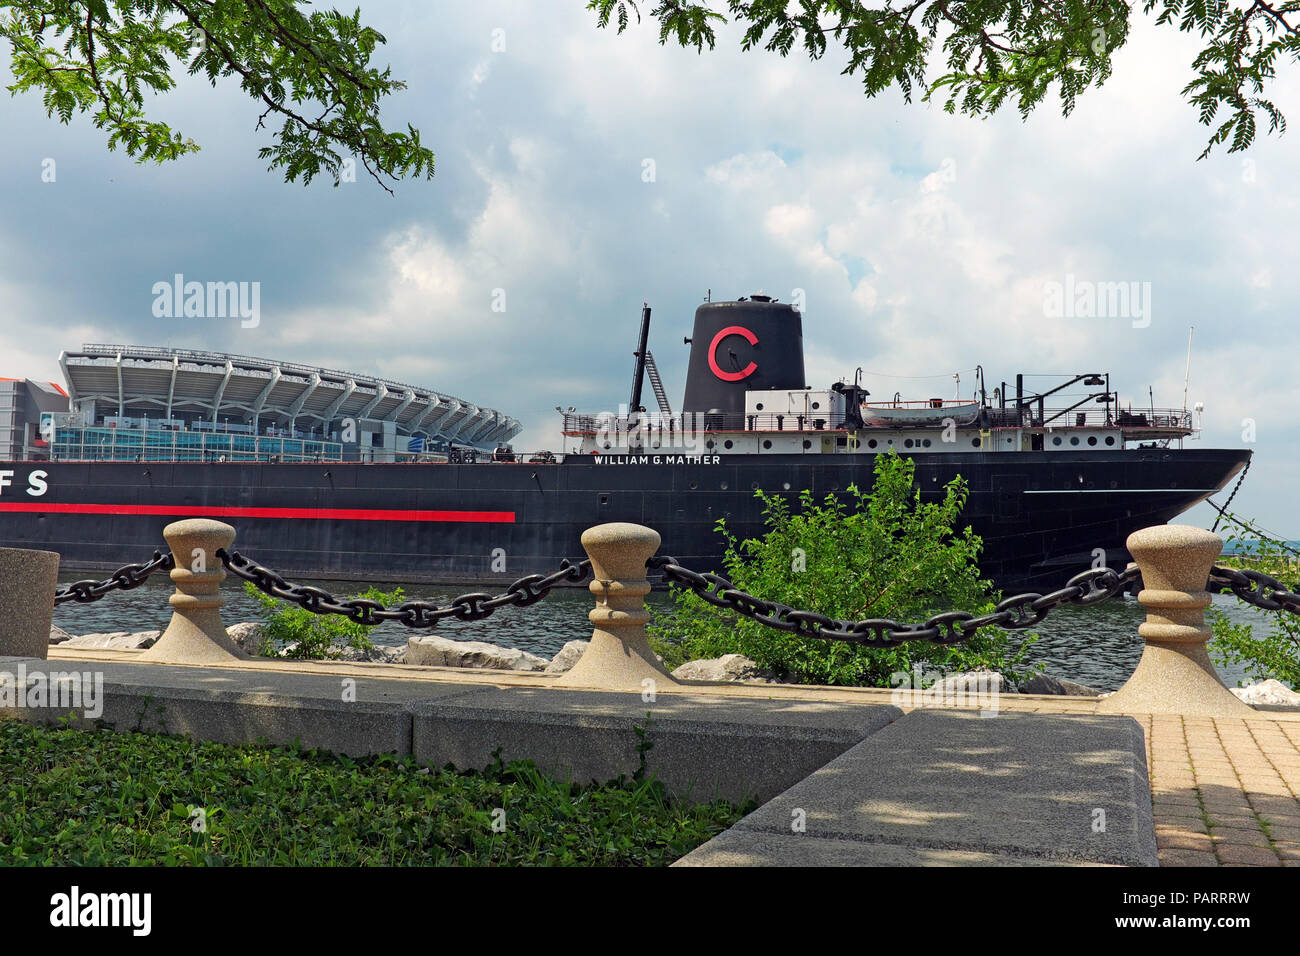 The William Mather Steamship, now a maritime museum, moored in the Cleveland, Ohio Northcoast harbor across from Voinovich Park on Lake Erie. Stock Photo